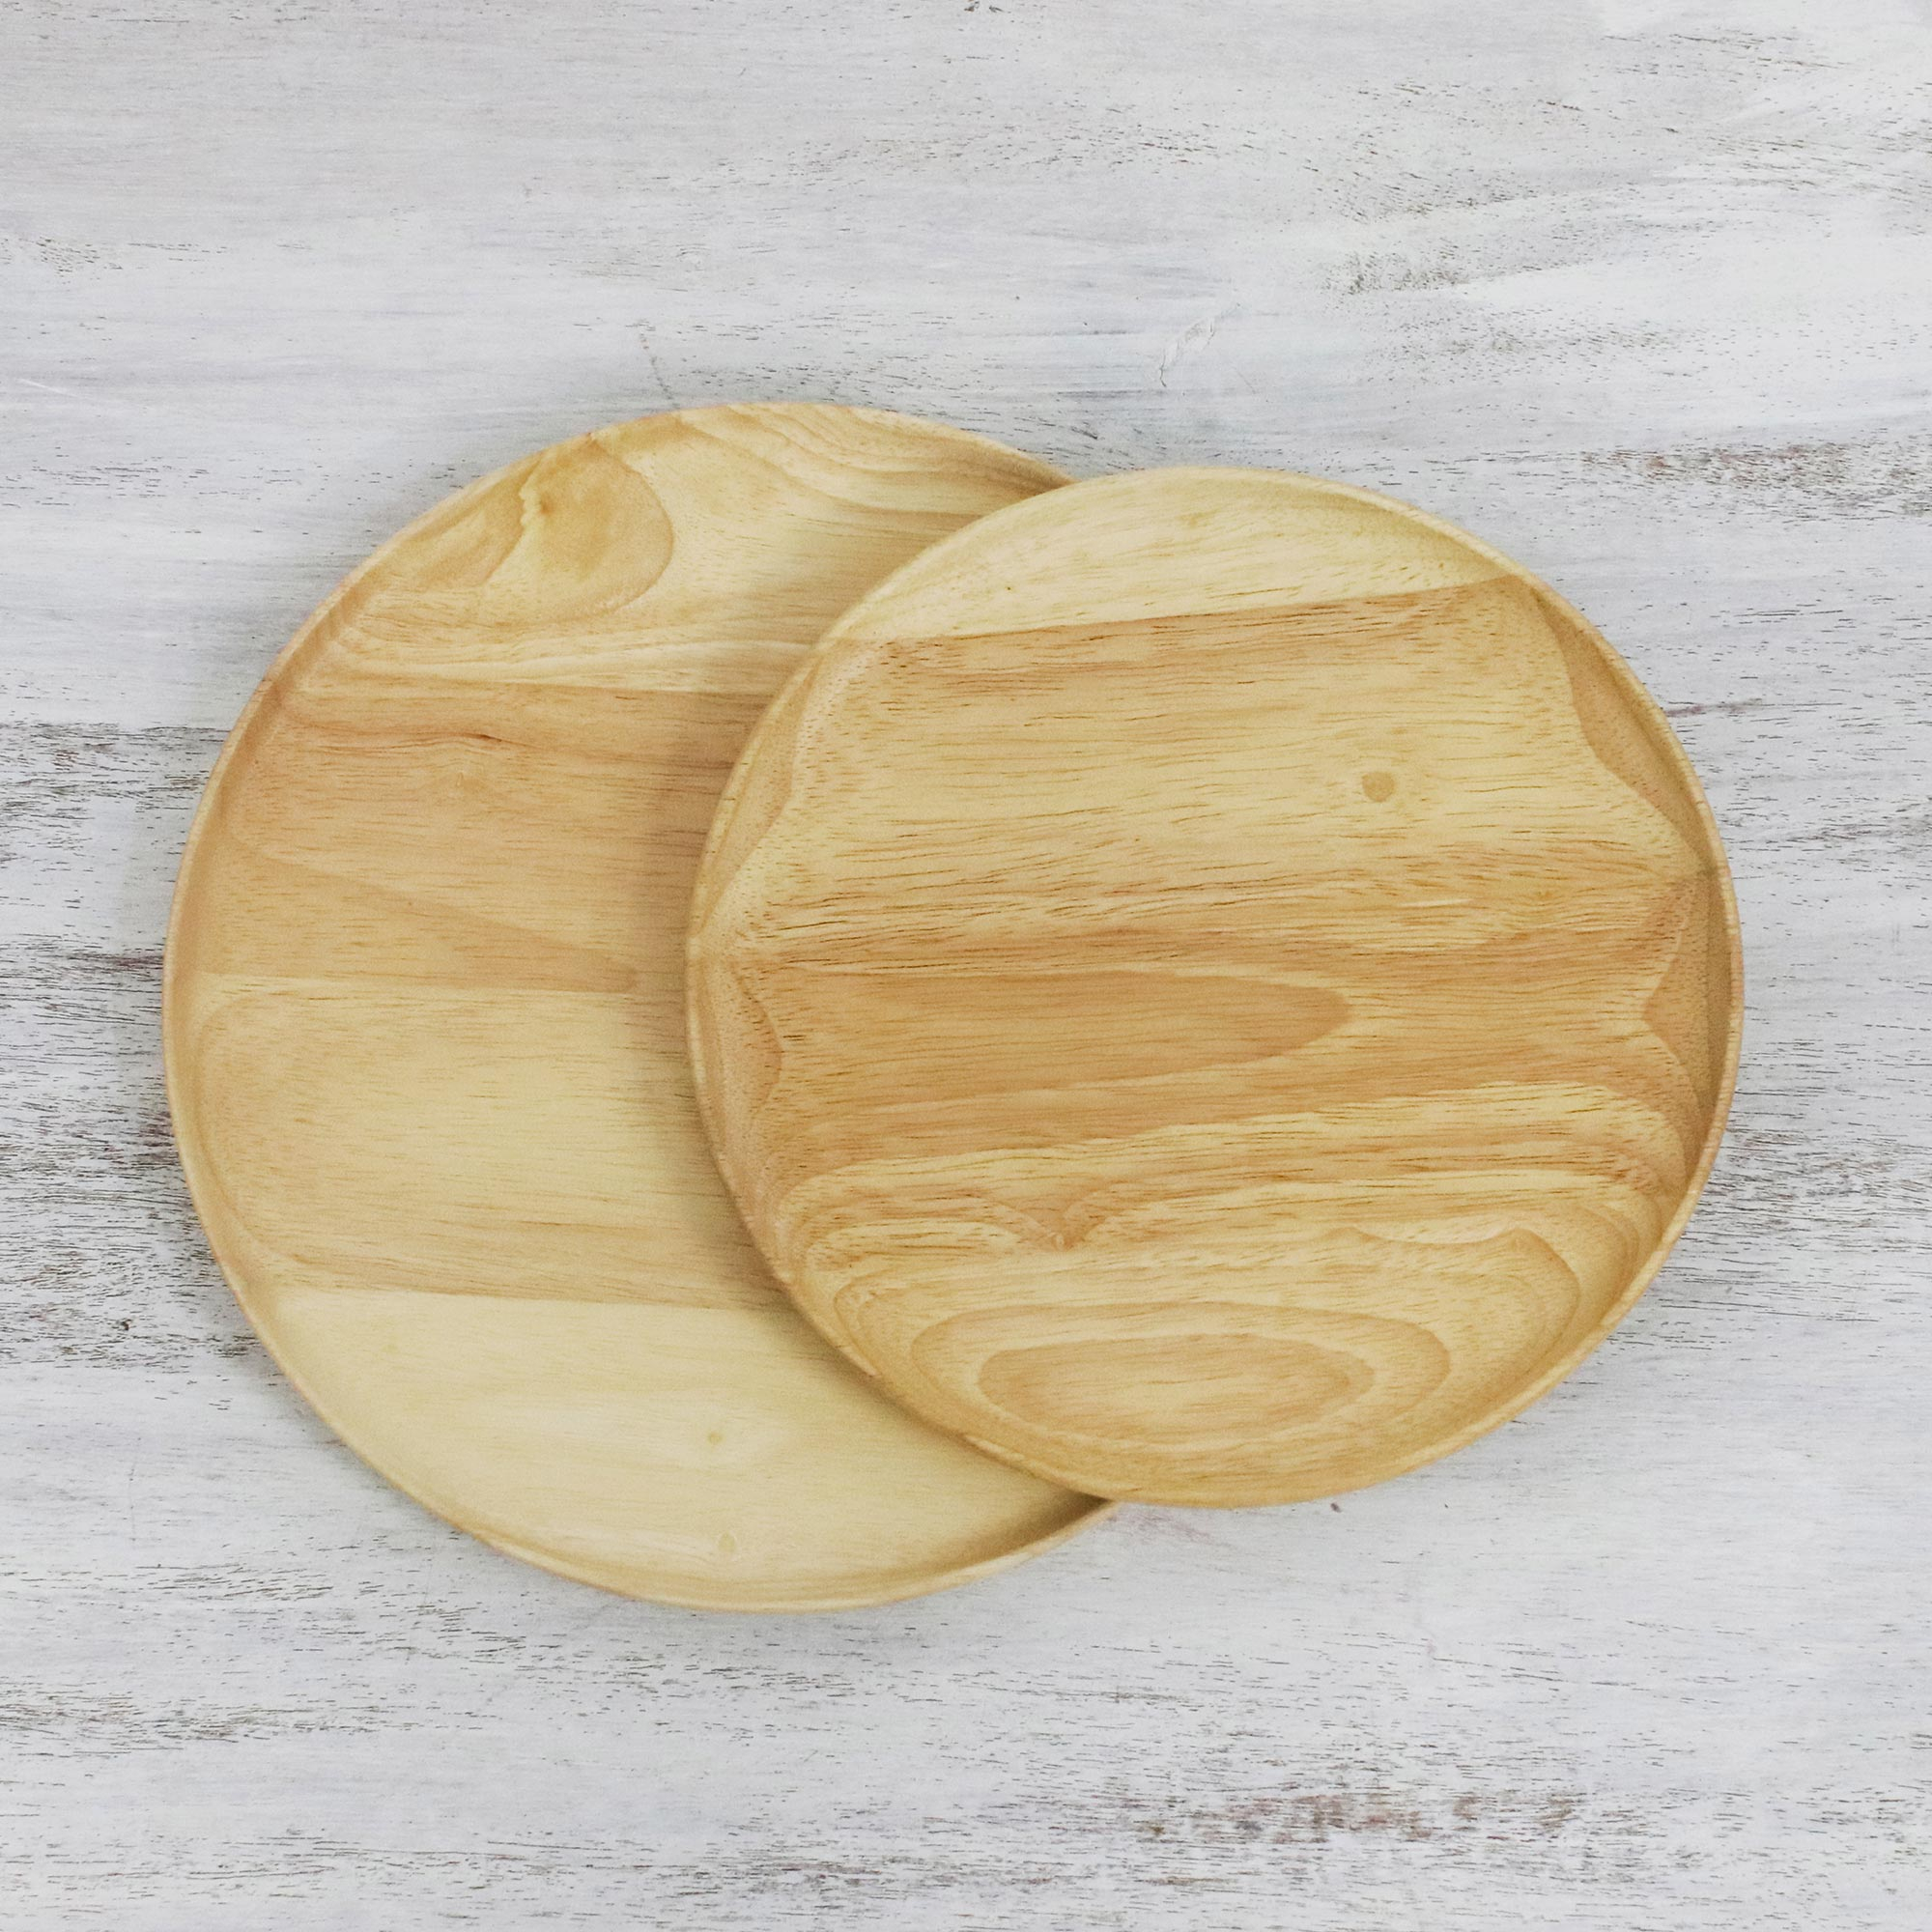 Pair of Handcrafted Natural Wooden Plates from Thailand - Natural ...